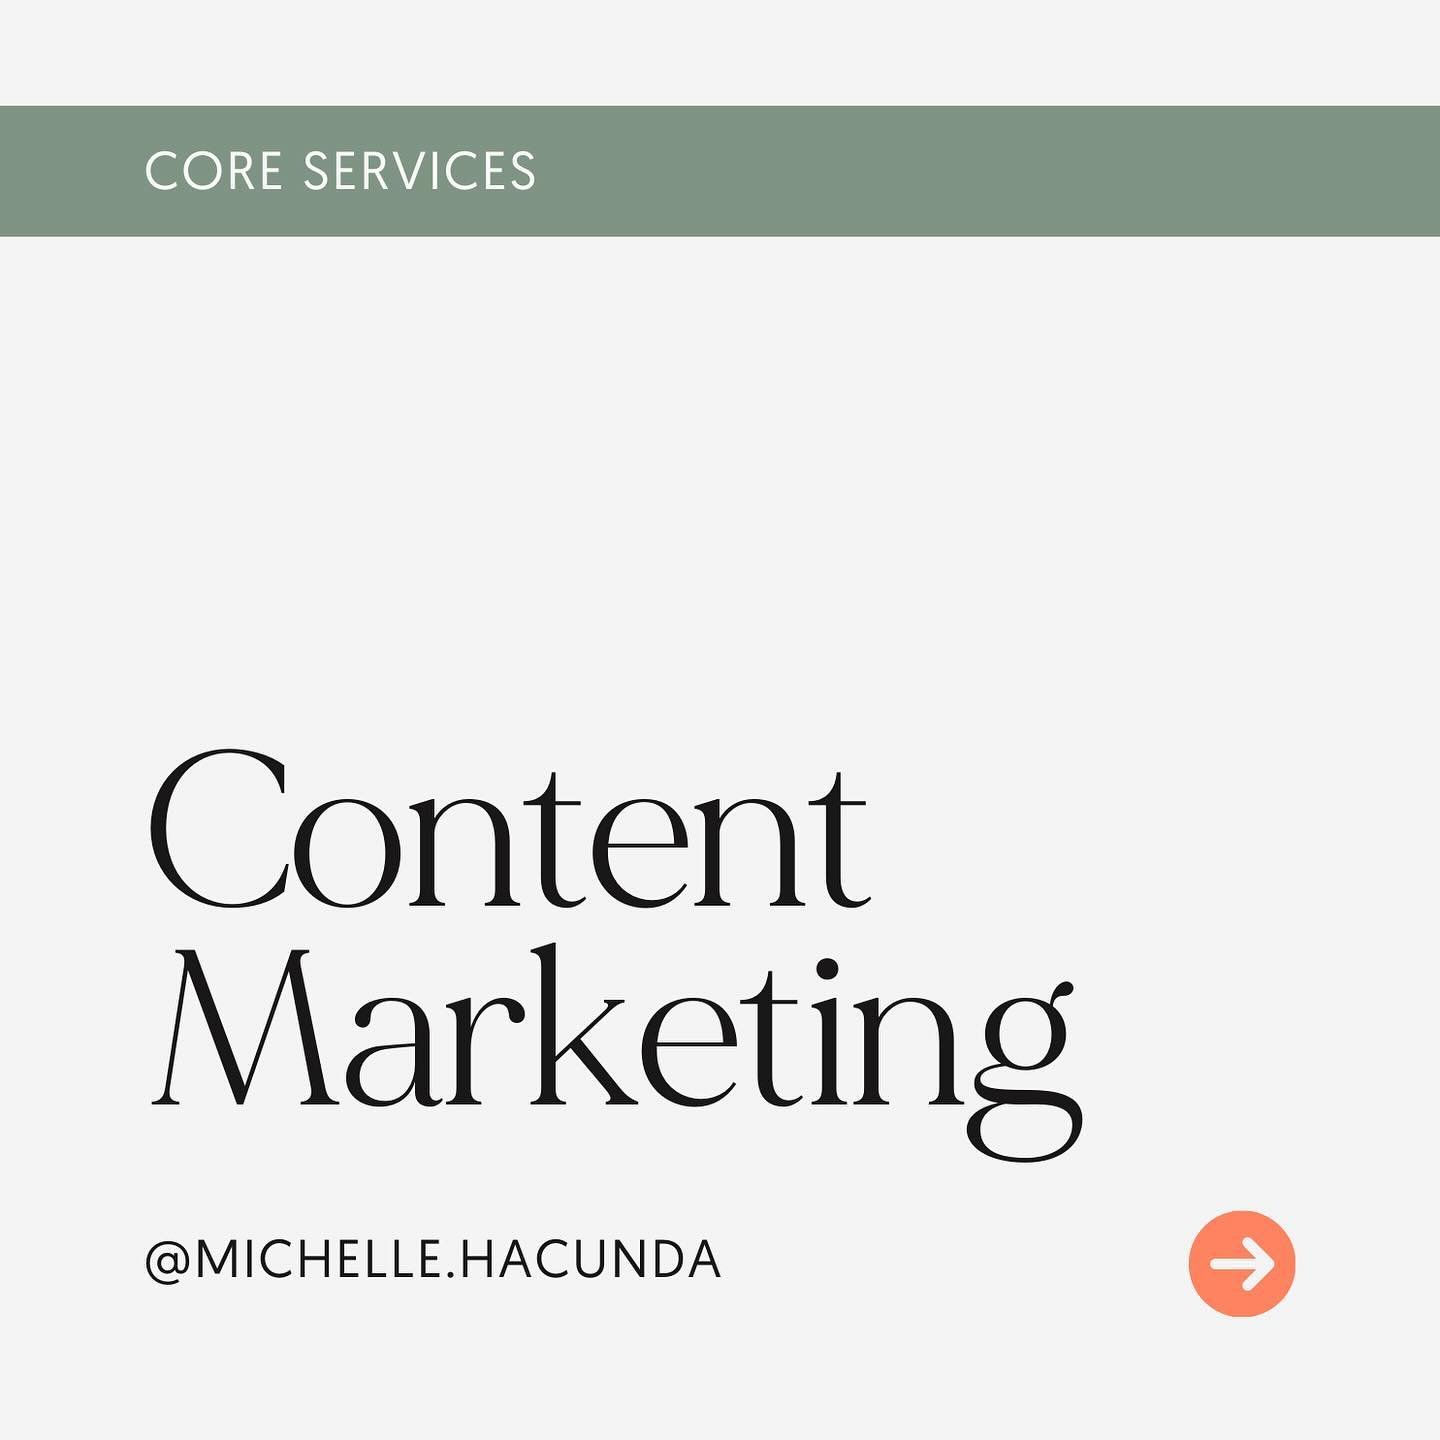 It&rsquo;s been a minute and we&rsquo;re excited to tell you about our marketing agency&rsquo;s core services! 

First up: content marketing ✍️

Long form. Short form. We love it all from social media captions to whitepapers, and everything in betwee